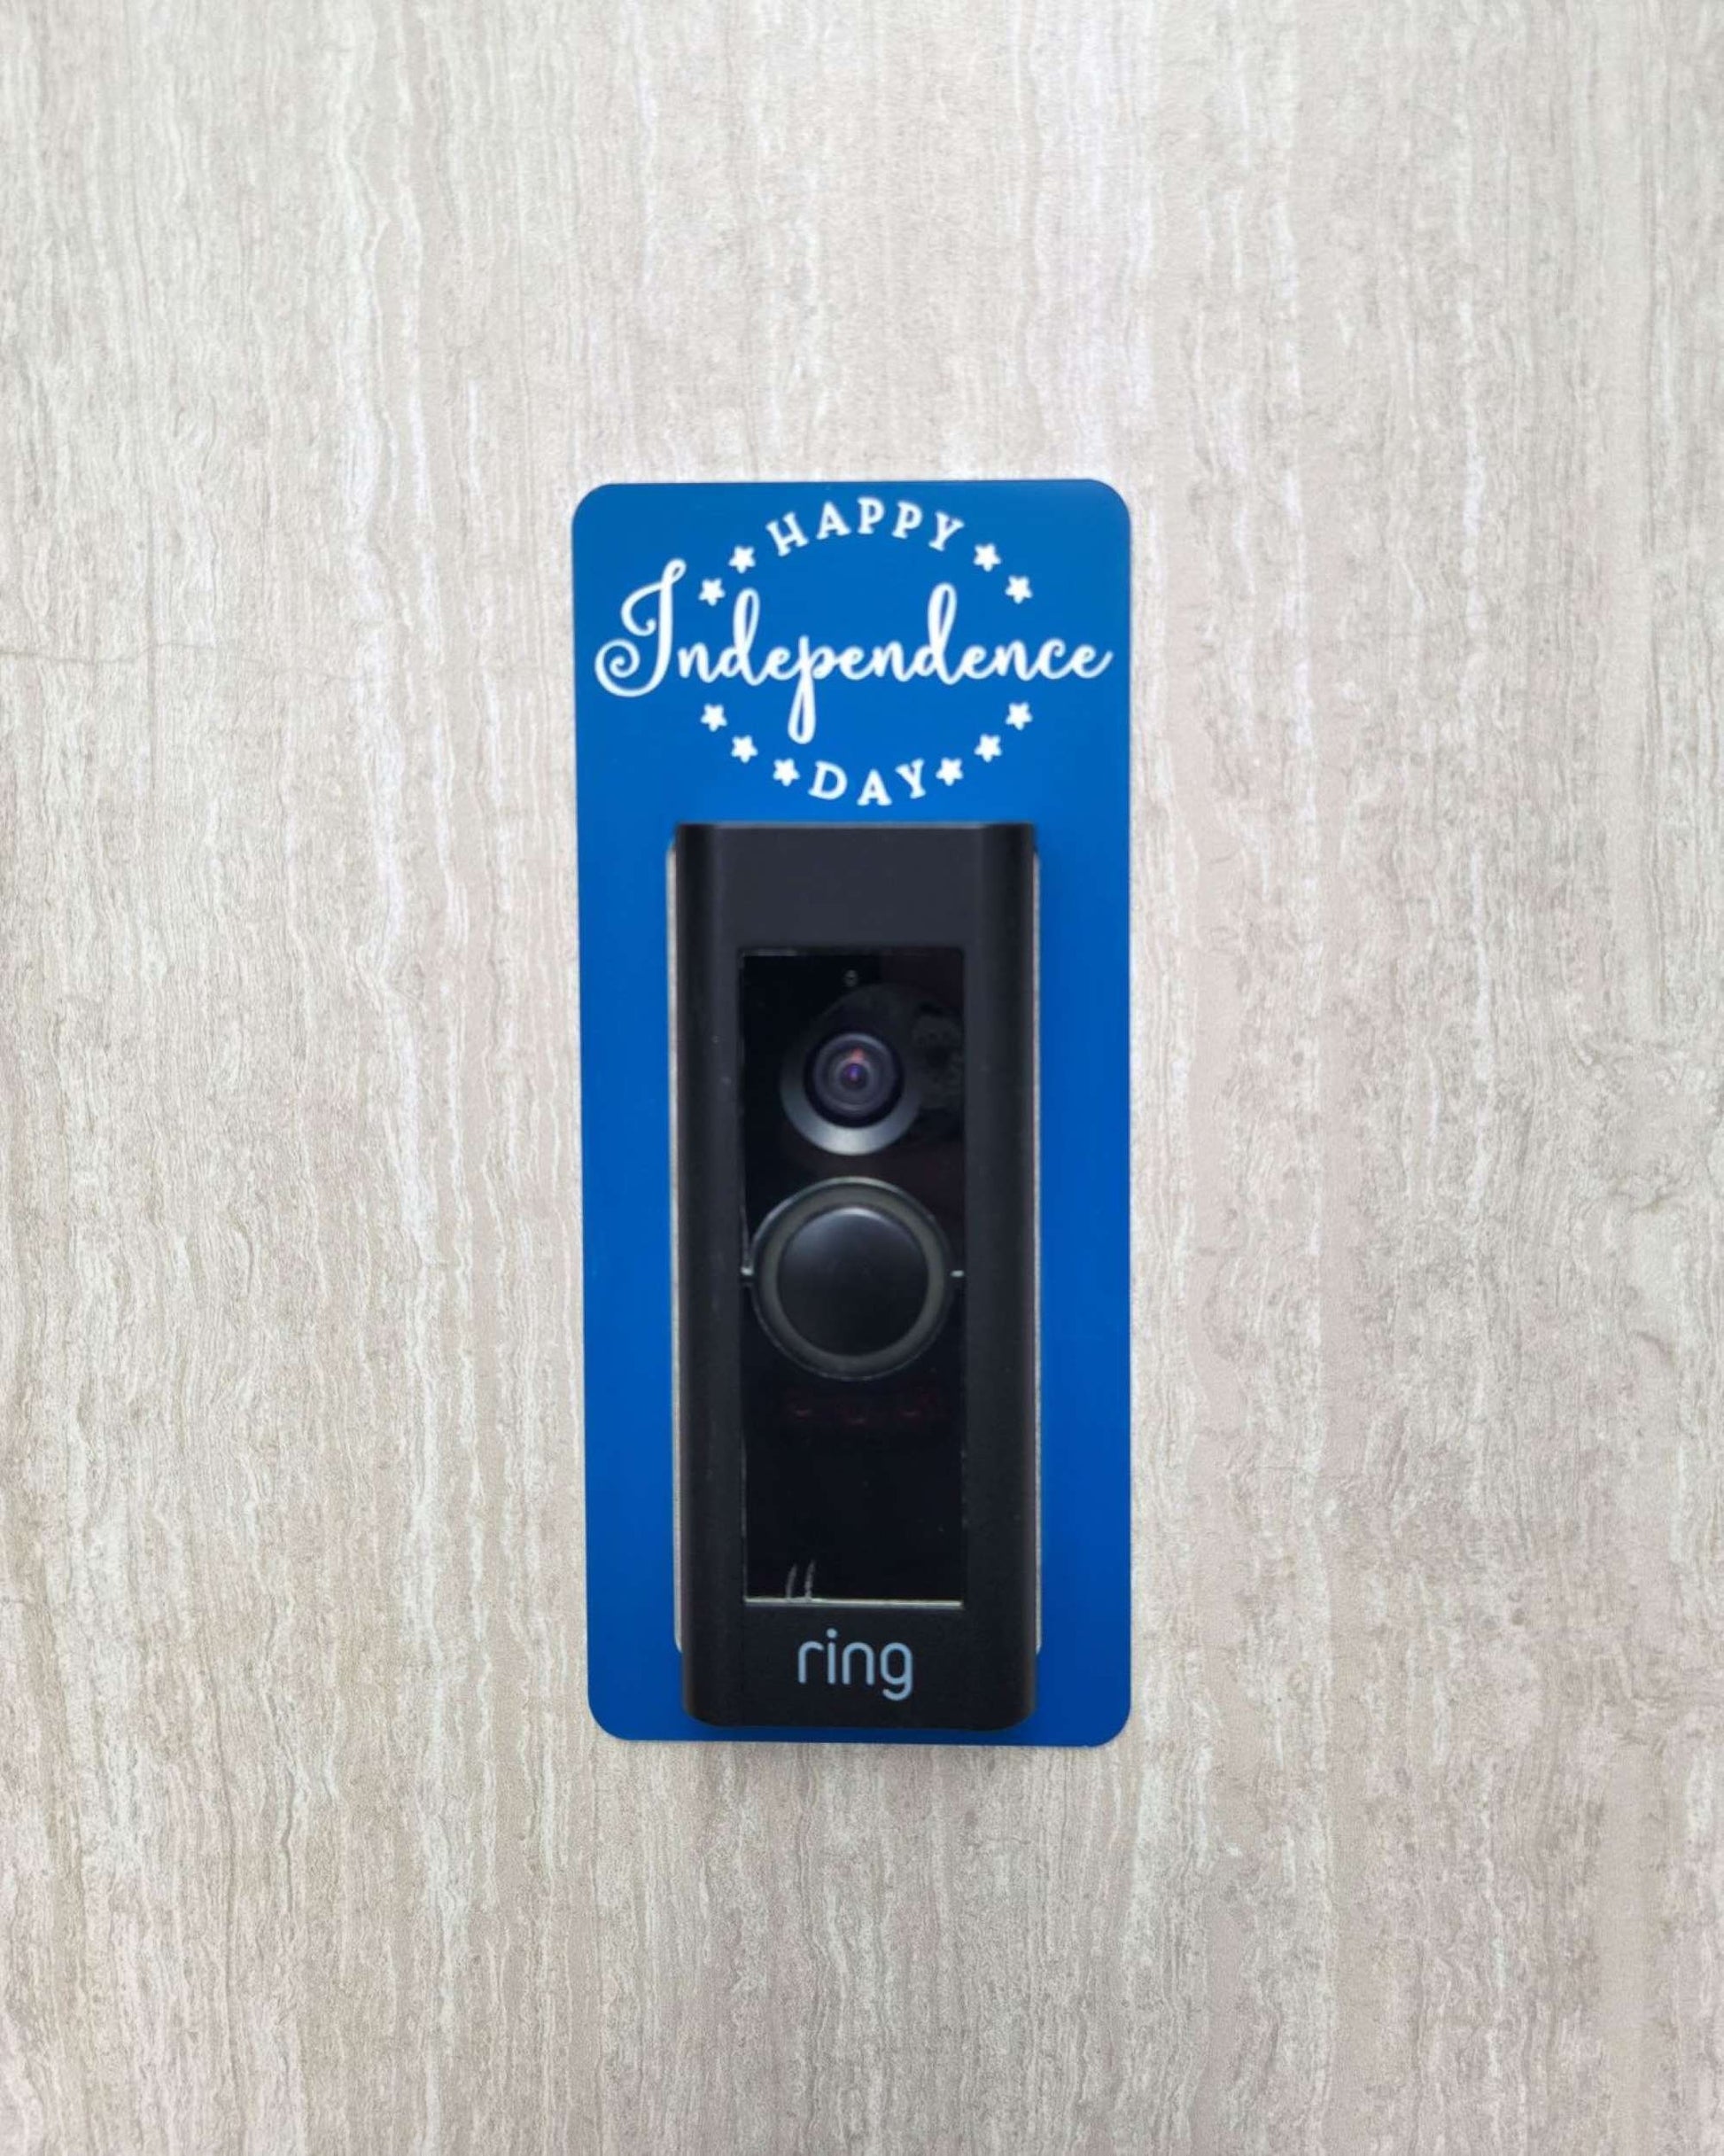 Blue laminate doorbell surround with white lettering saying Happy Independence Day and stars on ring doorbell and gray background